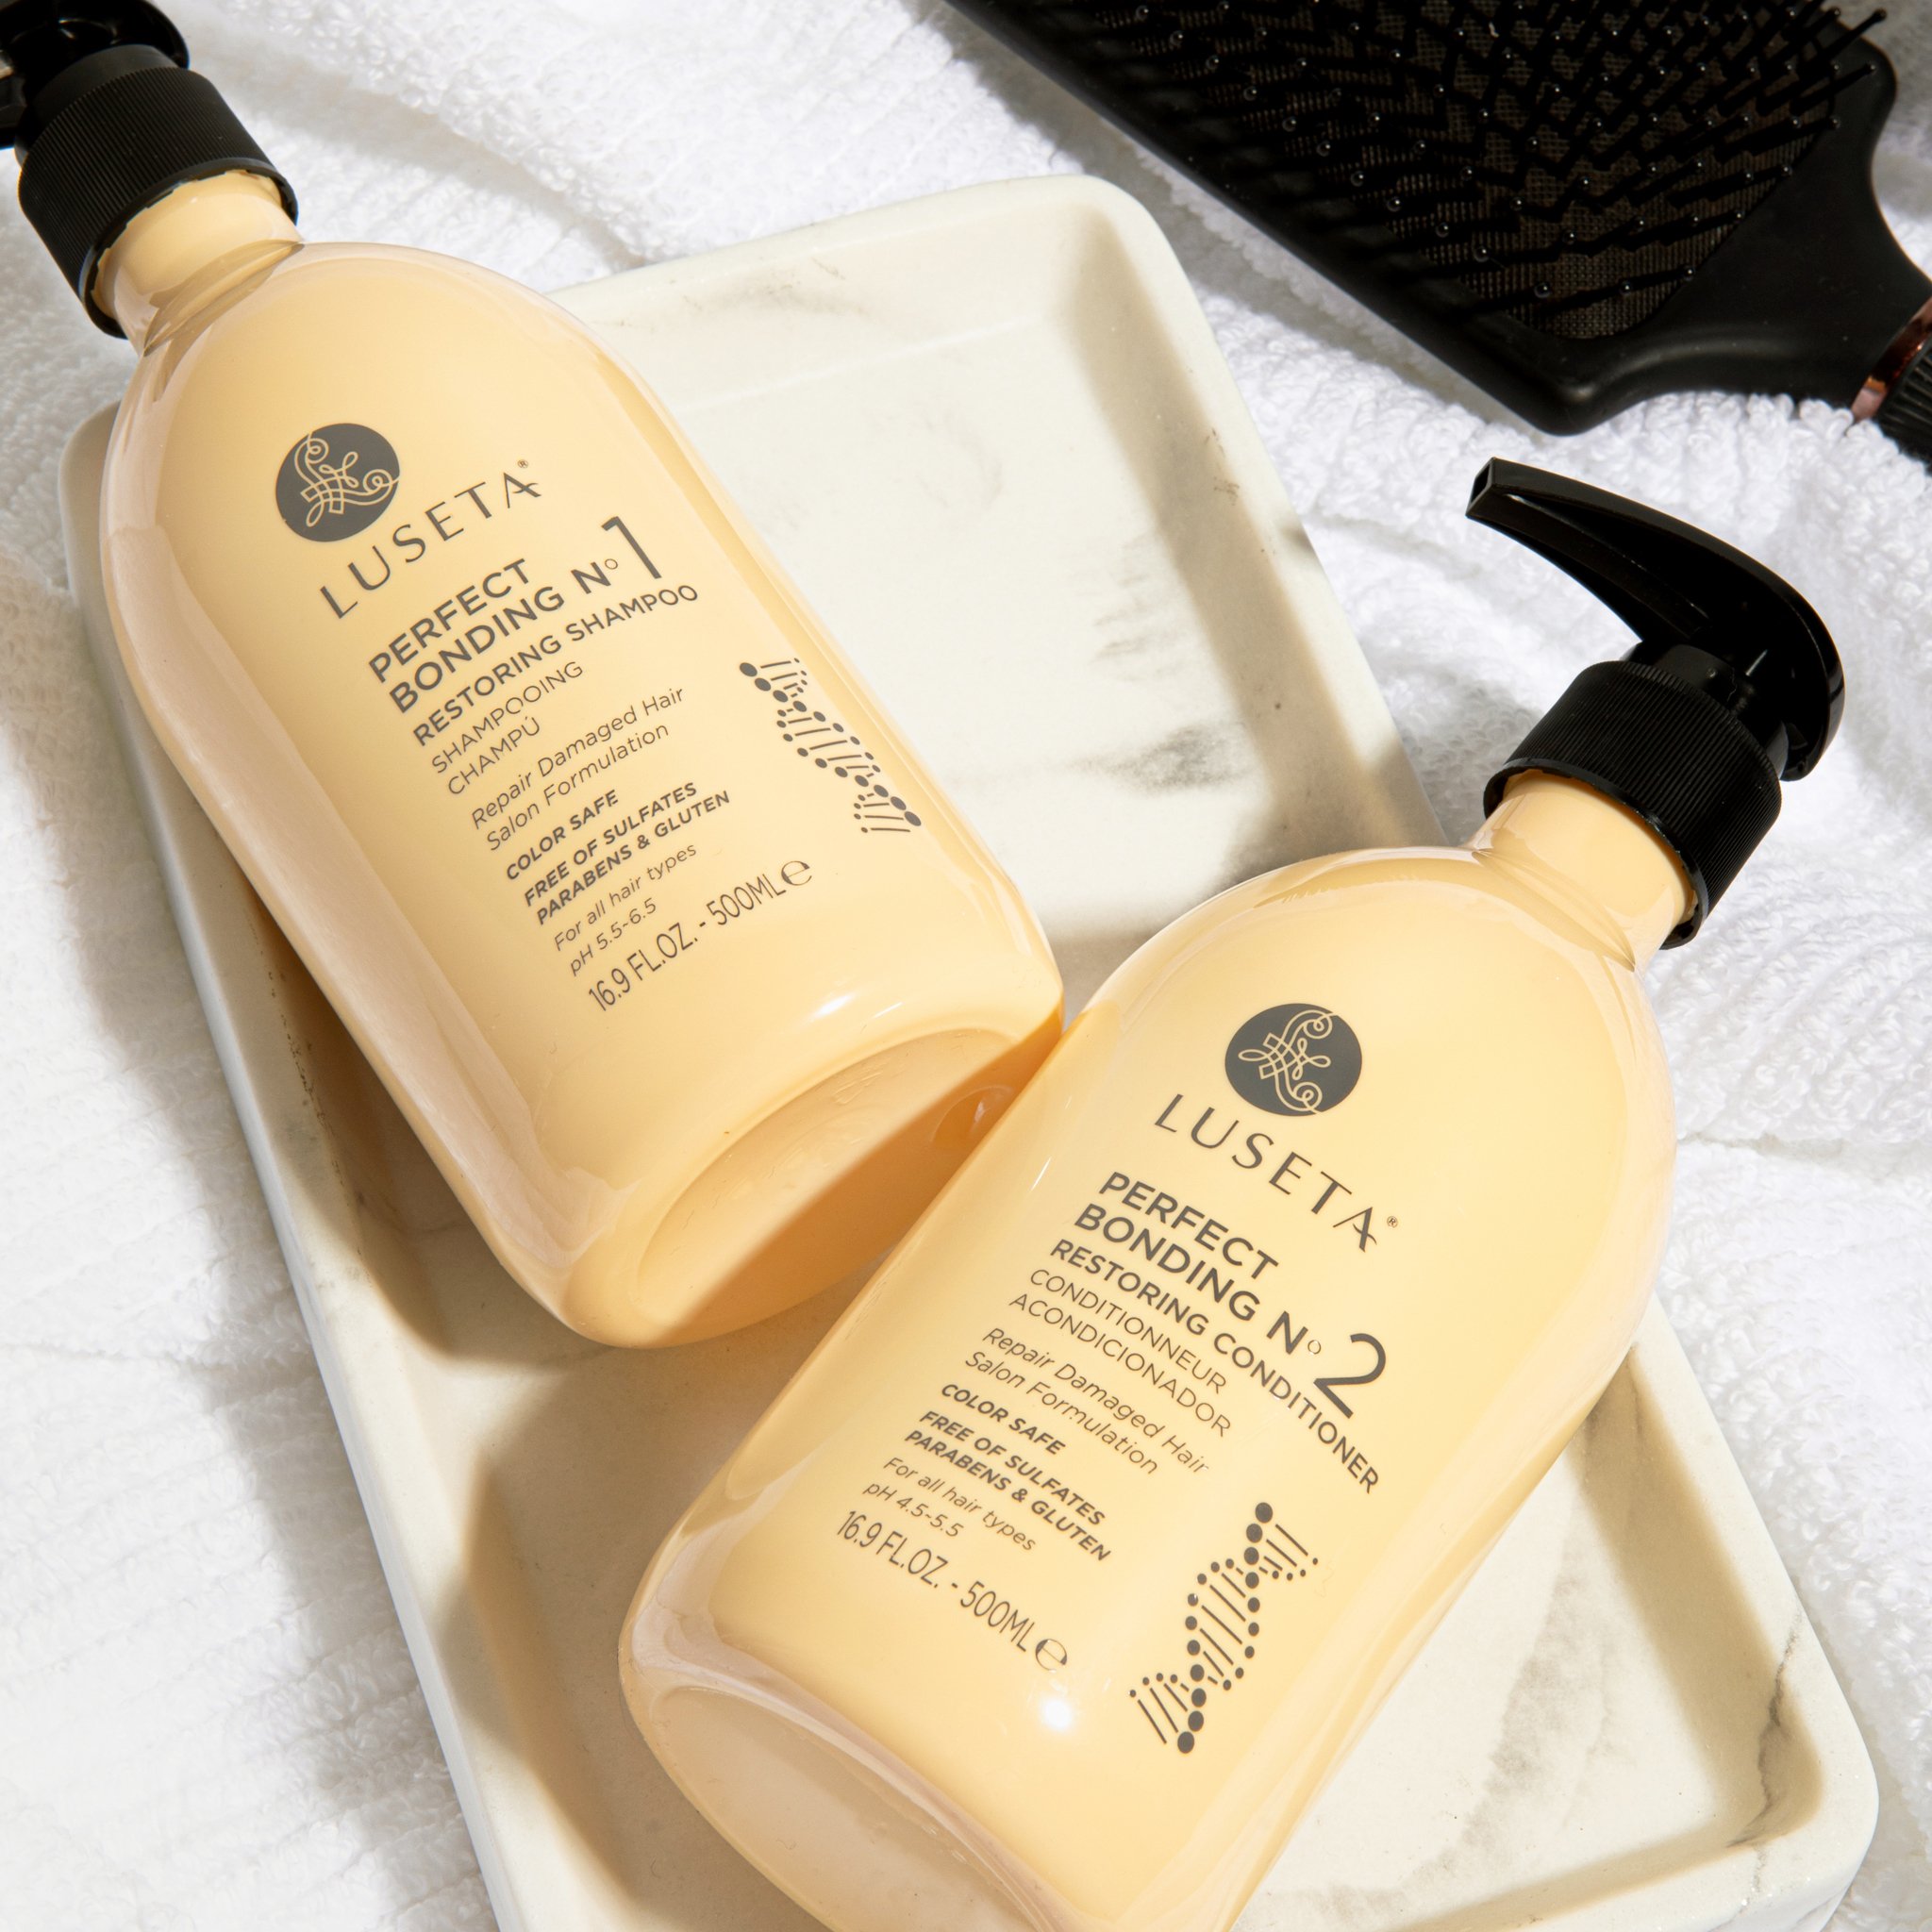 Luseta Perfect Bonding Hair Damage Repair Shampoo &amp; Conditioner Set for All Hair Types - Sulfate Free Paraben Free Color Safe Salon Formulation - image 3 of 6